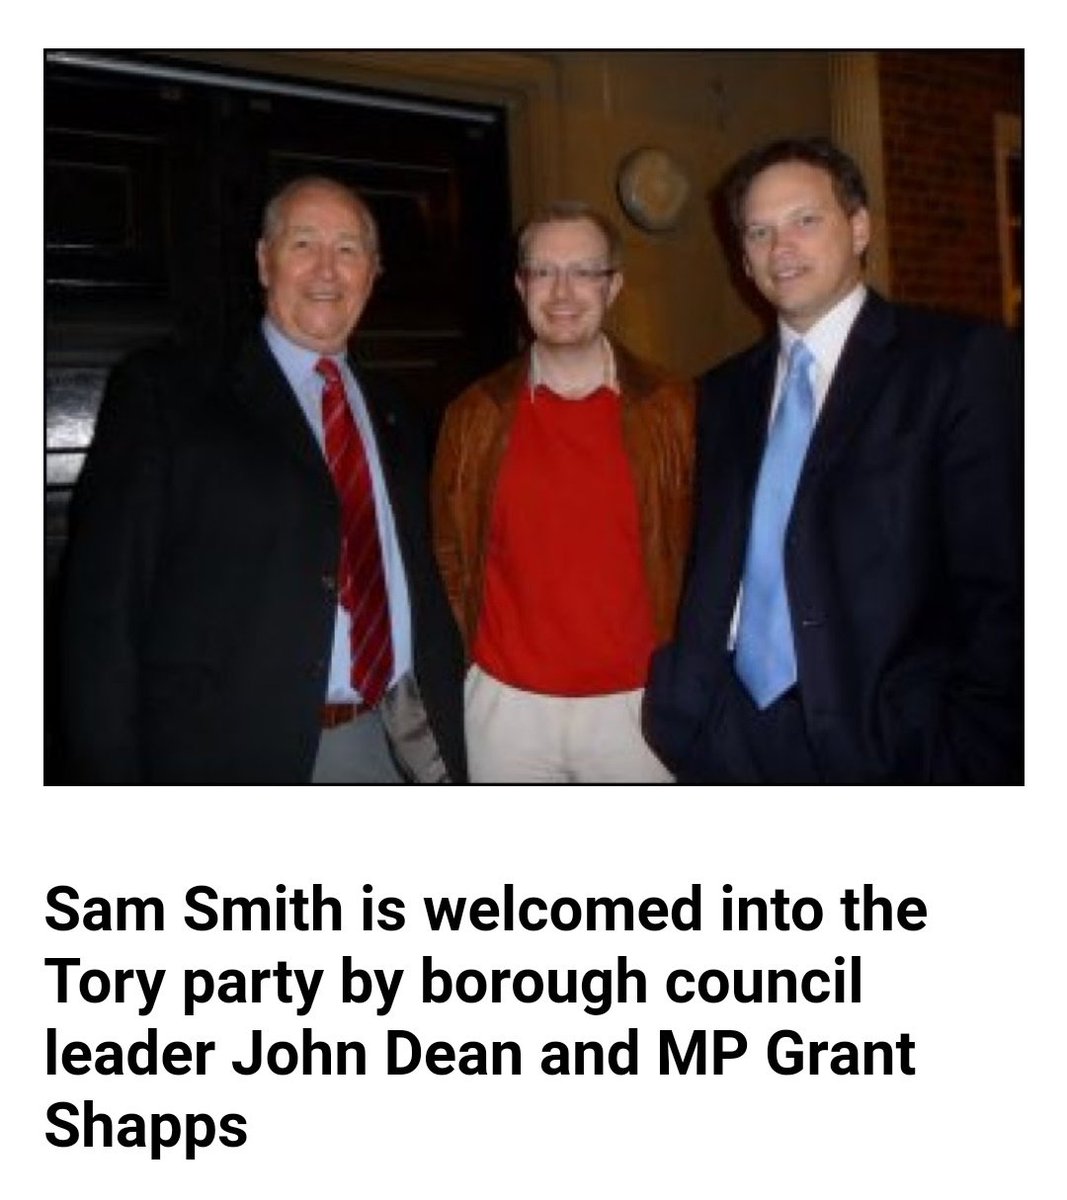 What every self-respecting pole-dancer needs is a selfie with Grant Shapps to show to friends. You know, the Grant Shapps whose Welwyn/Hatfield Tories supported Alan Franey, Savile's buddy.